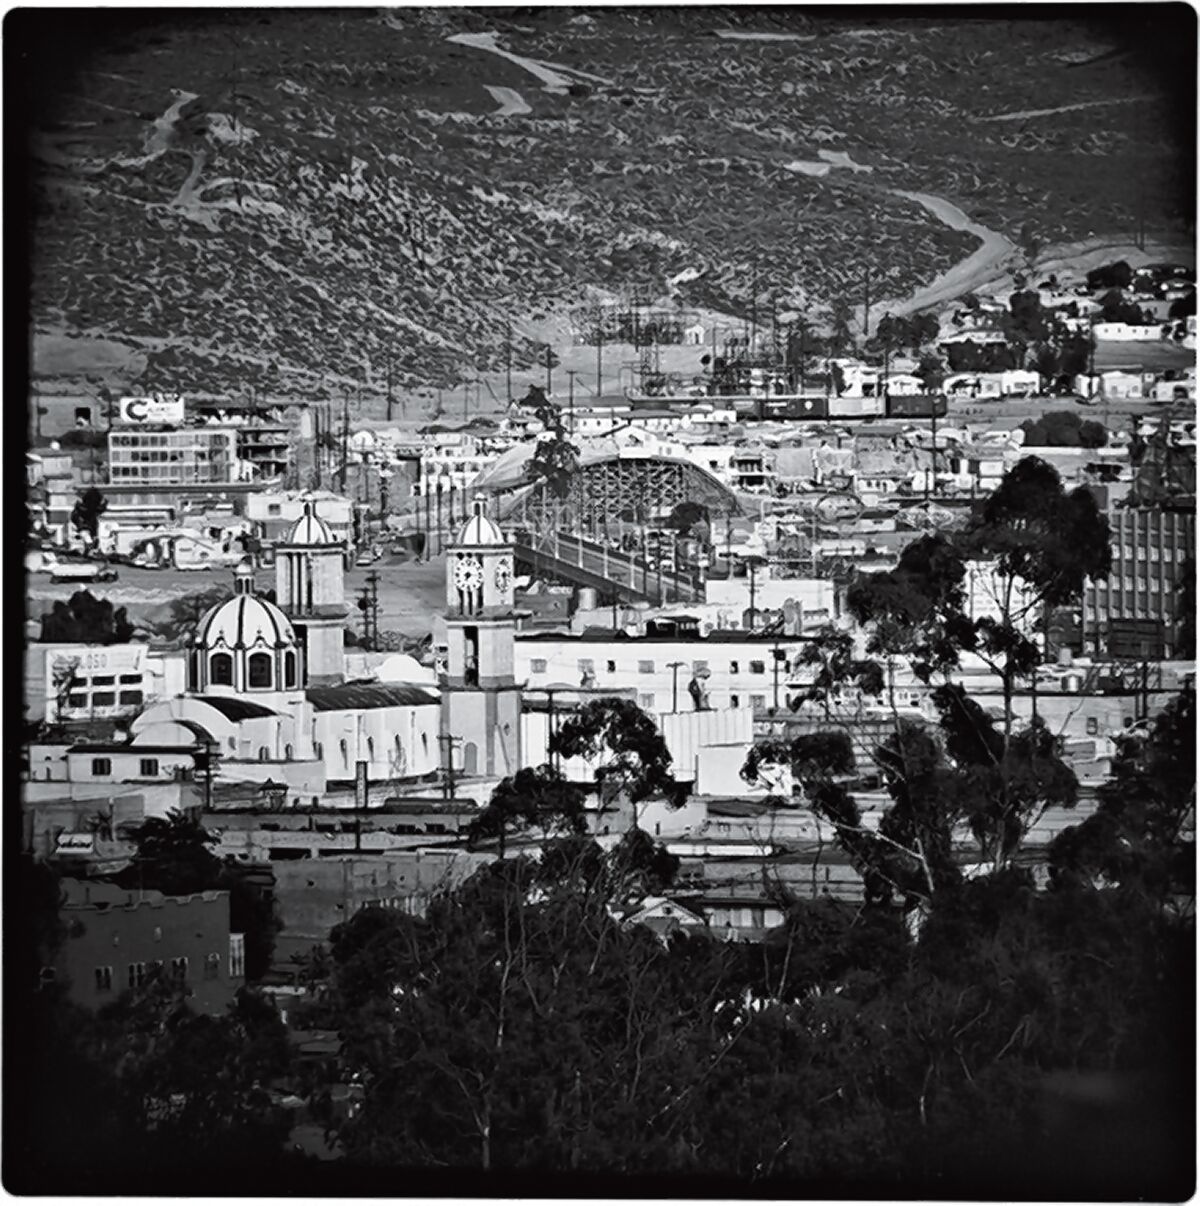 Guadalupe Cathedral in the foreground, with Puente Mexico and Puerta de Mexico (under construction) in the center of the photograph. In the background, the hillside with vegetation in San Ysidro, California, and to the right a portion of Colonic Libertad. Gelatin Silver Print 1964. Photograph by Harry Crosby, Harry Crosby Collection, Special Collections & Archives, UC San Diego